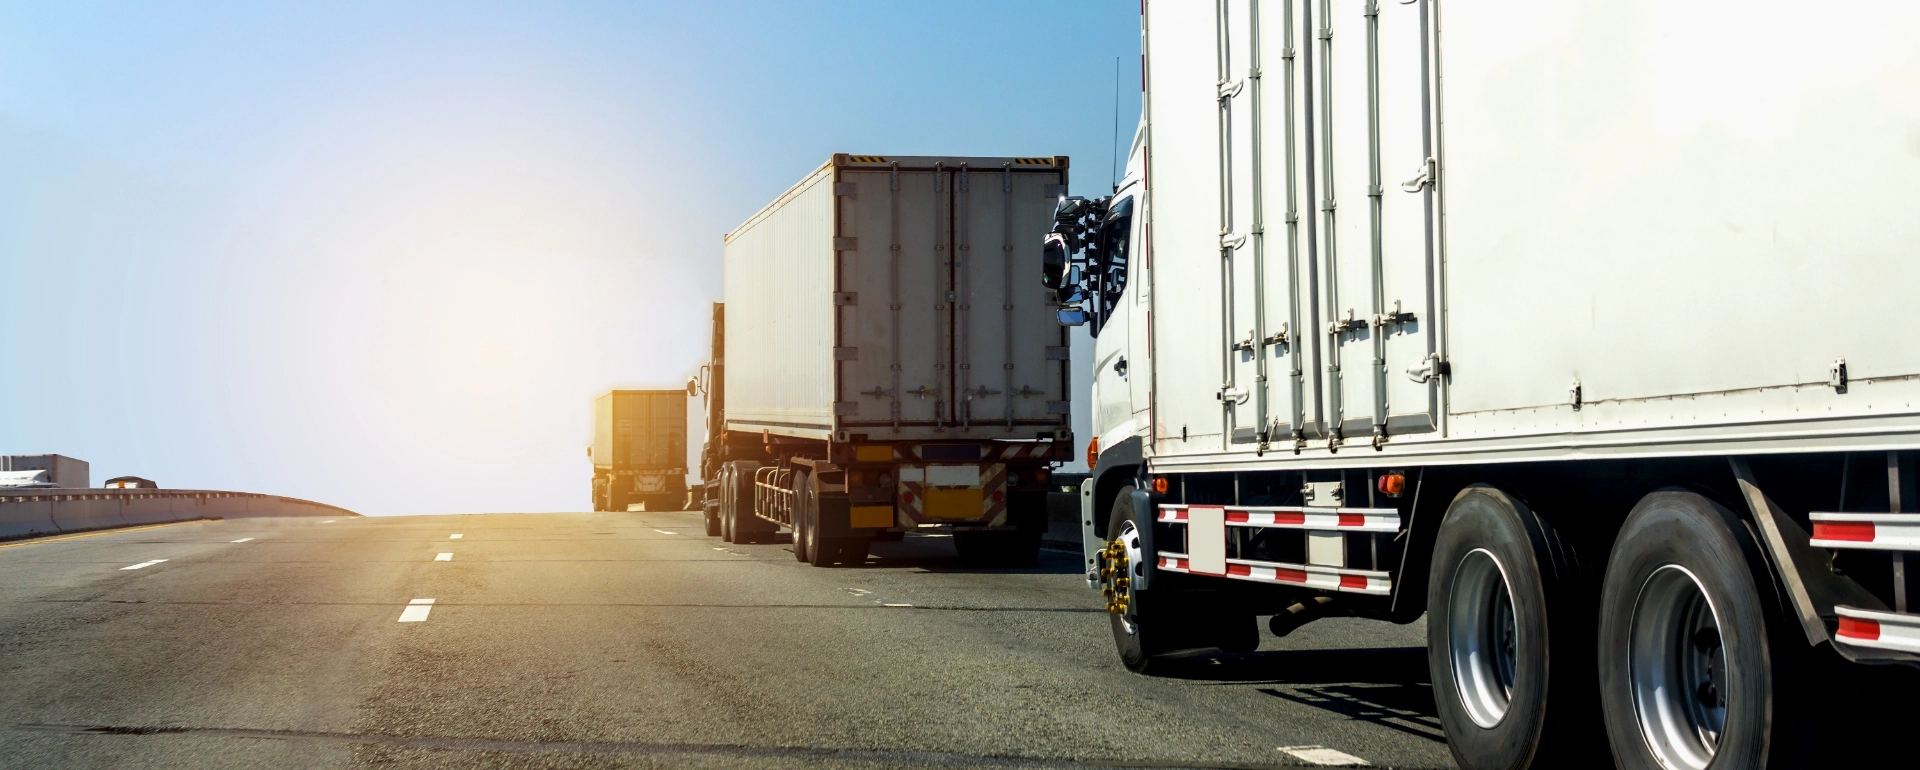 Top 5 Transportation Trends Reshaping the Logistics Industry in 2021